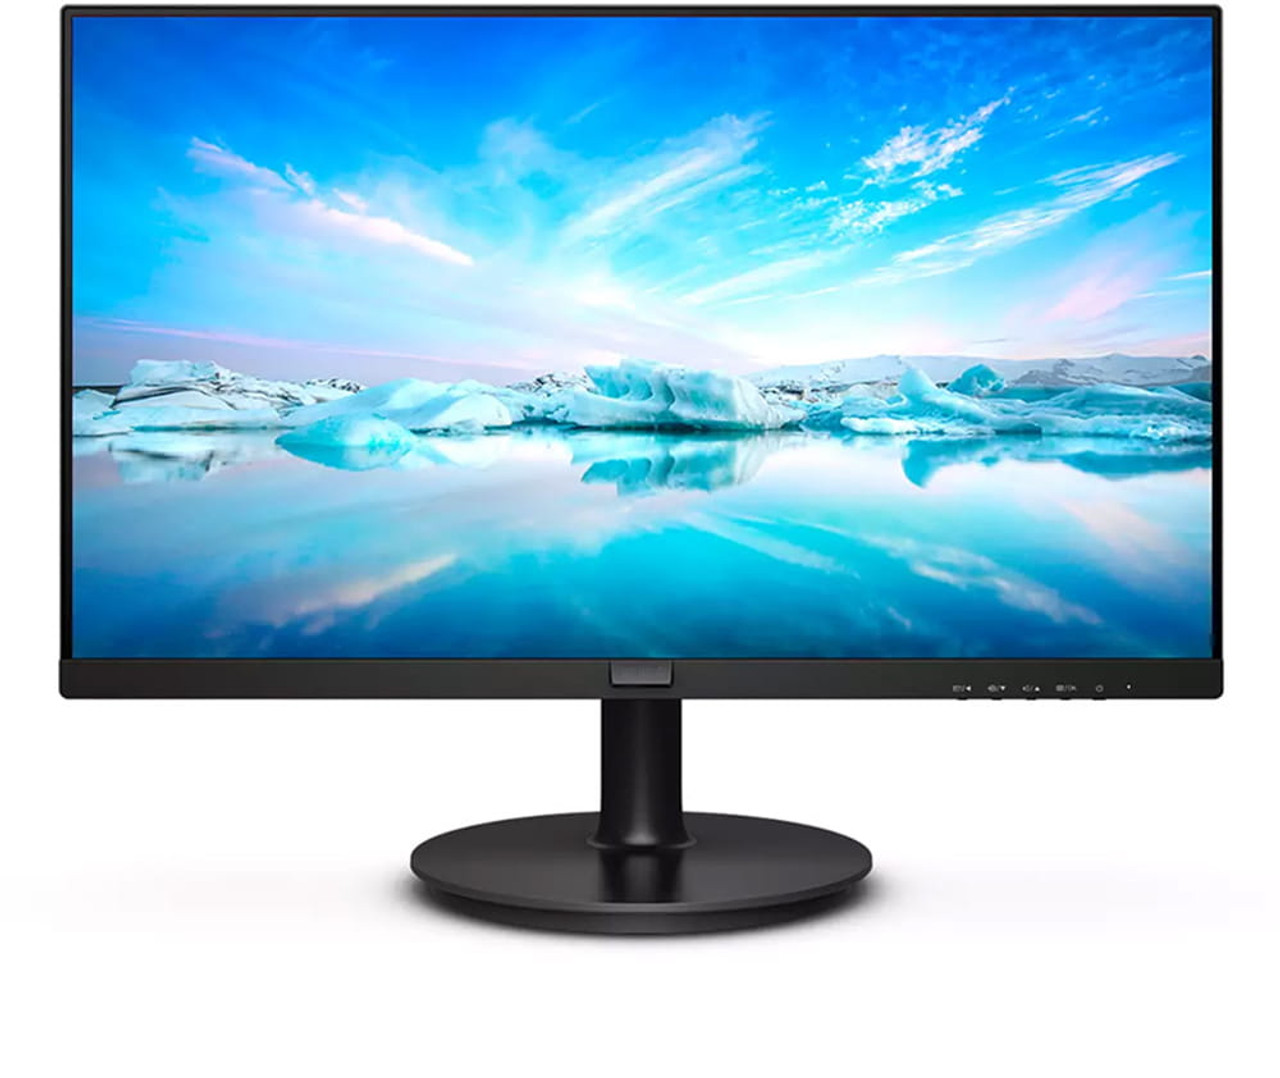 +$199 - 24" (23.6") FHD Monitor + HDMI / DP Cable Included 